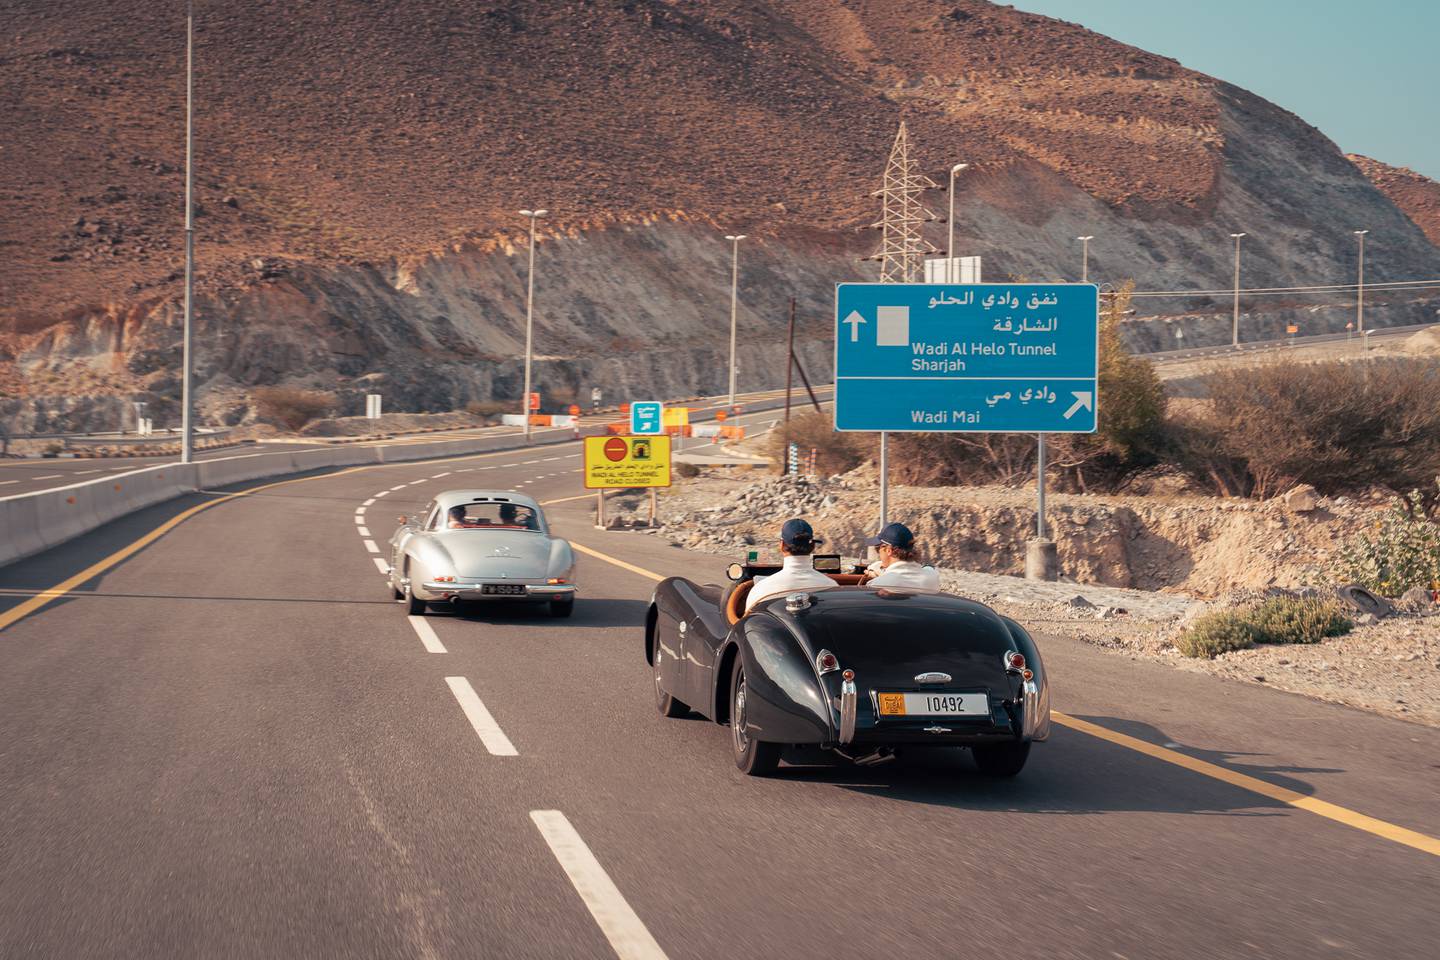 The Mille Miglia route went from Dubai to the mountainous northern emirates, finally ending in Abu Dhabi, via the F1 circuit on Yas Island. Photo: Jaguar 